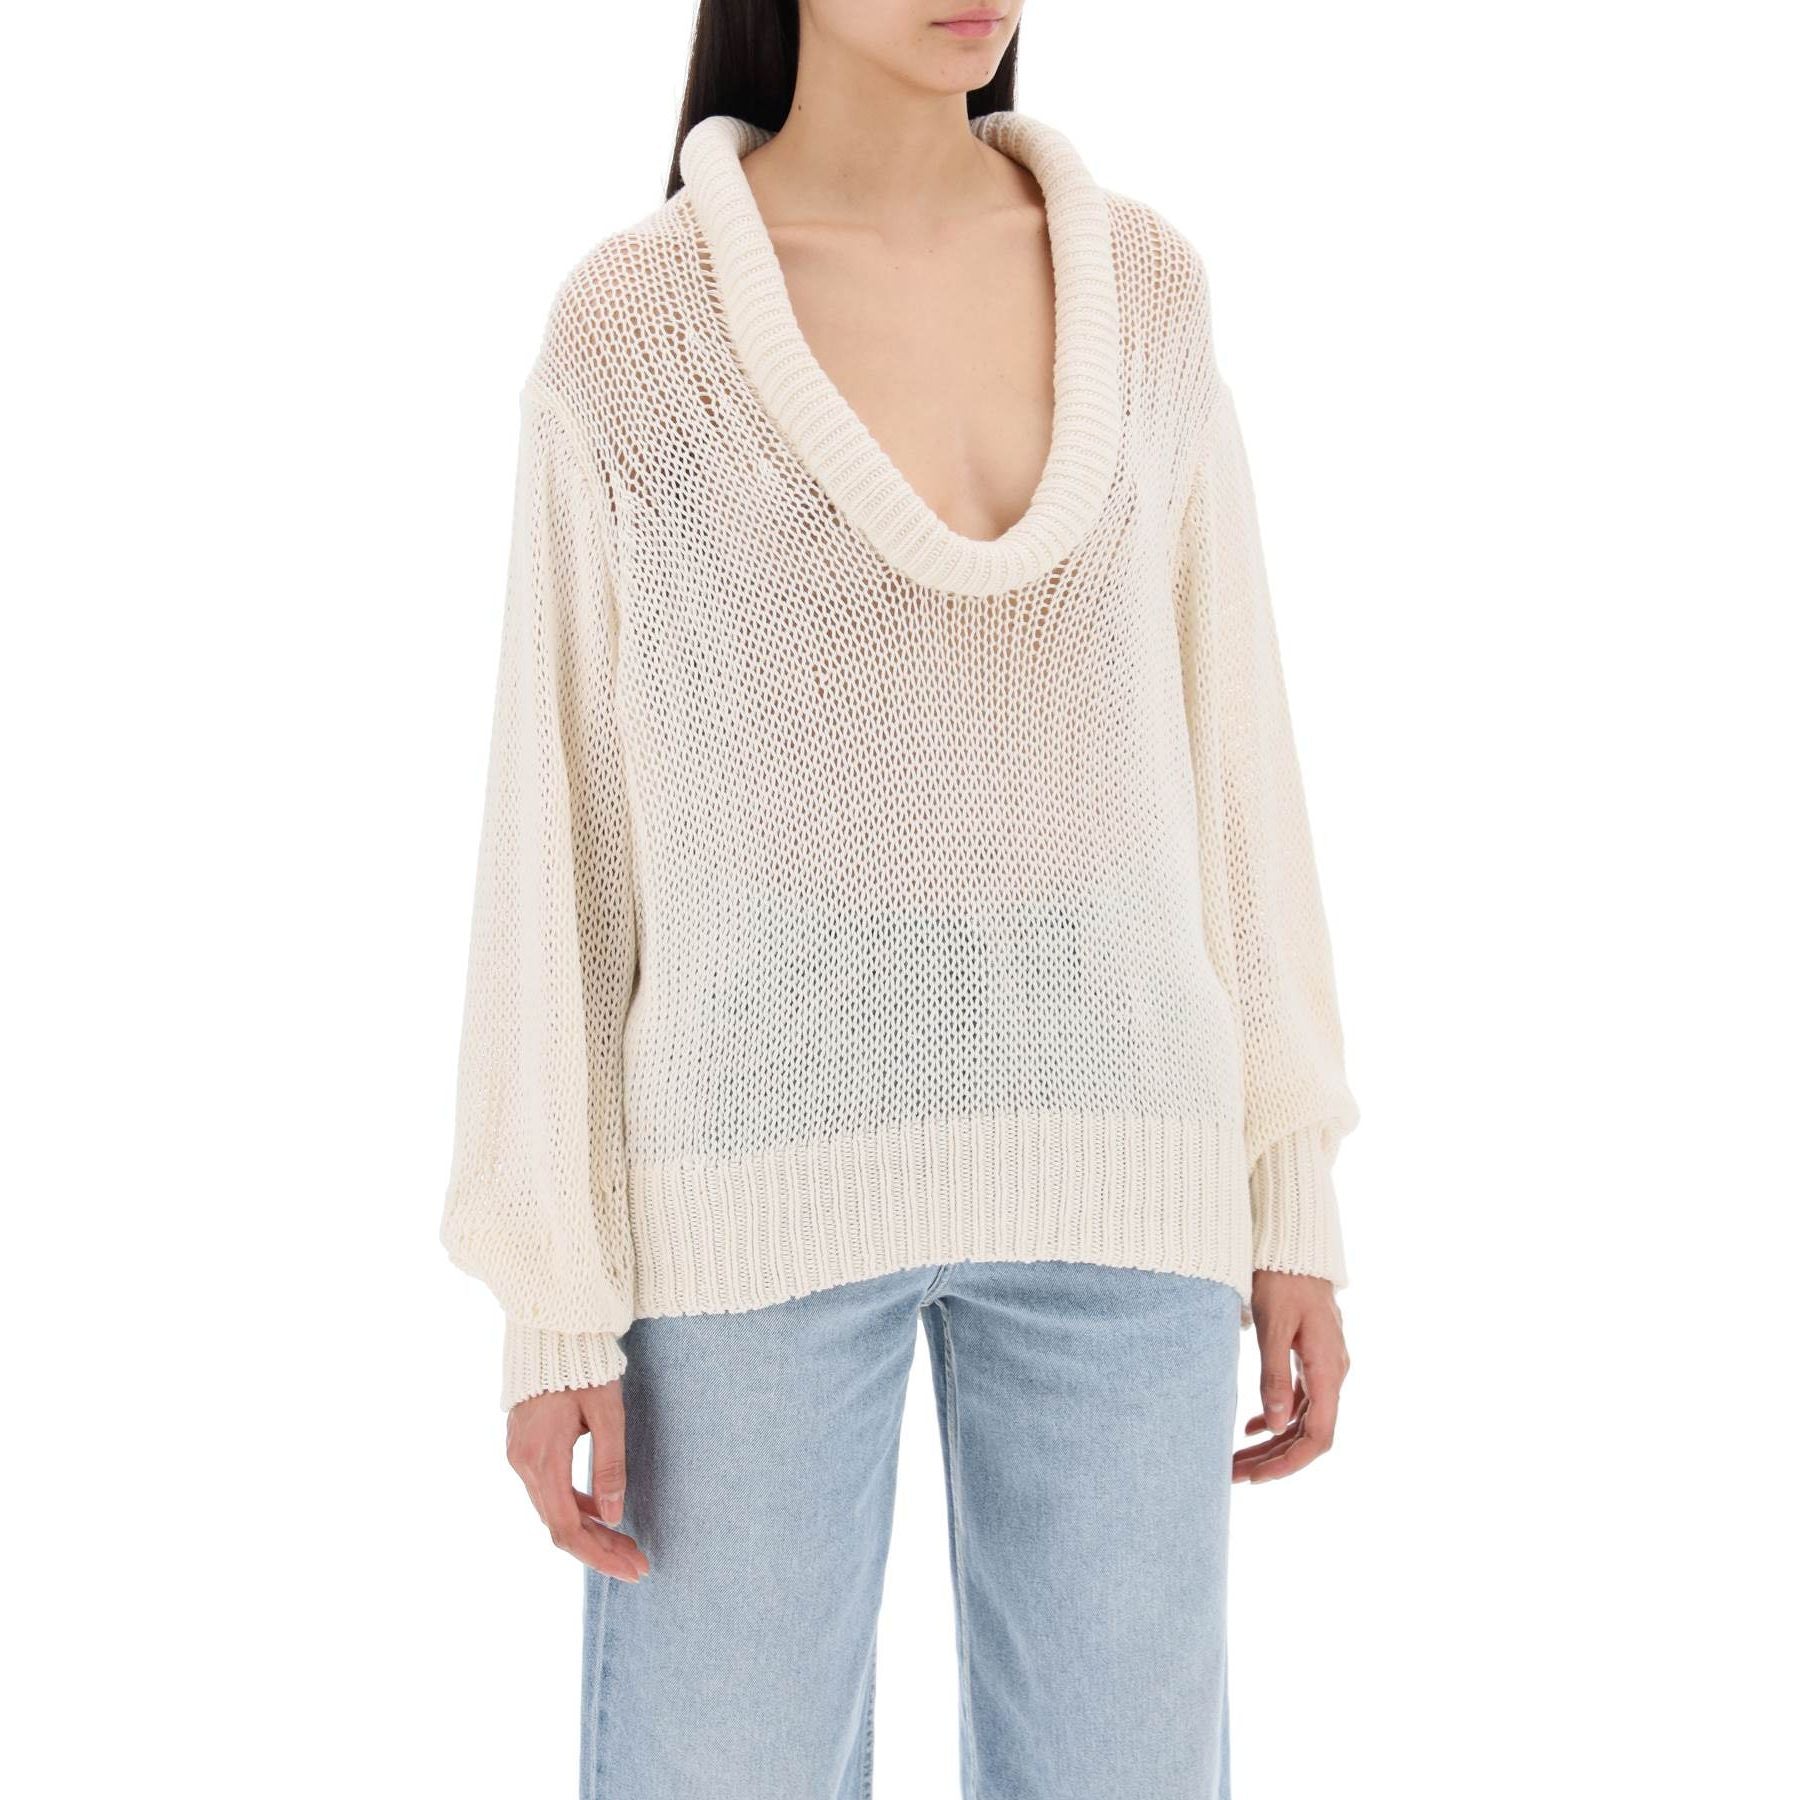 The Bruno Silk and Cotton Knit Sweater